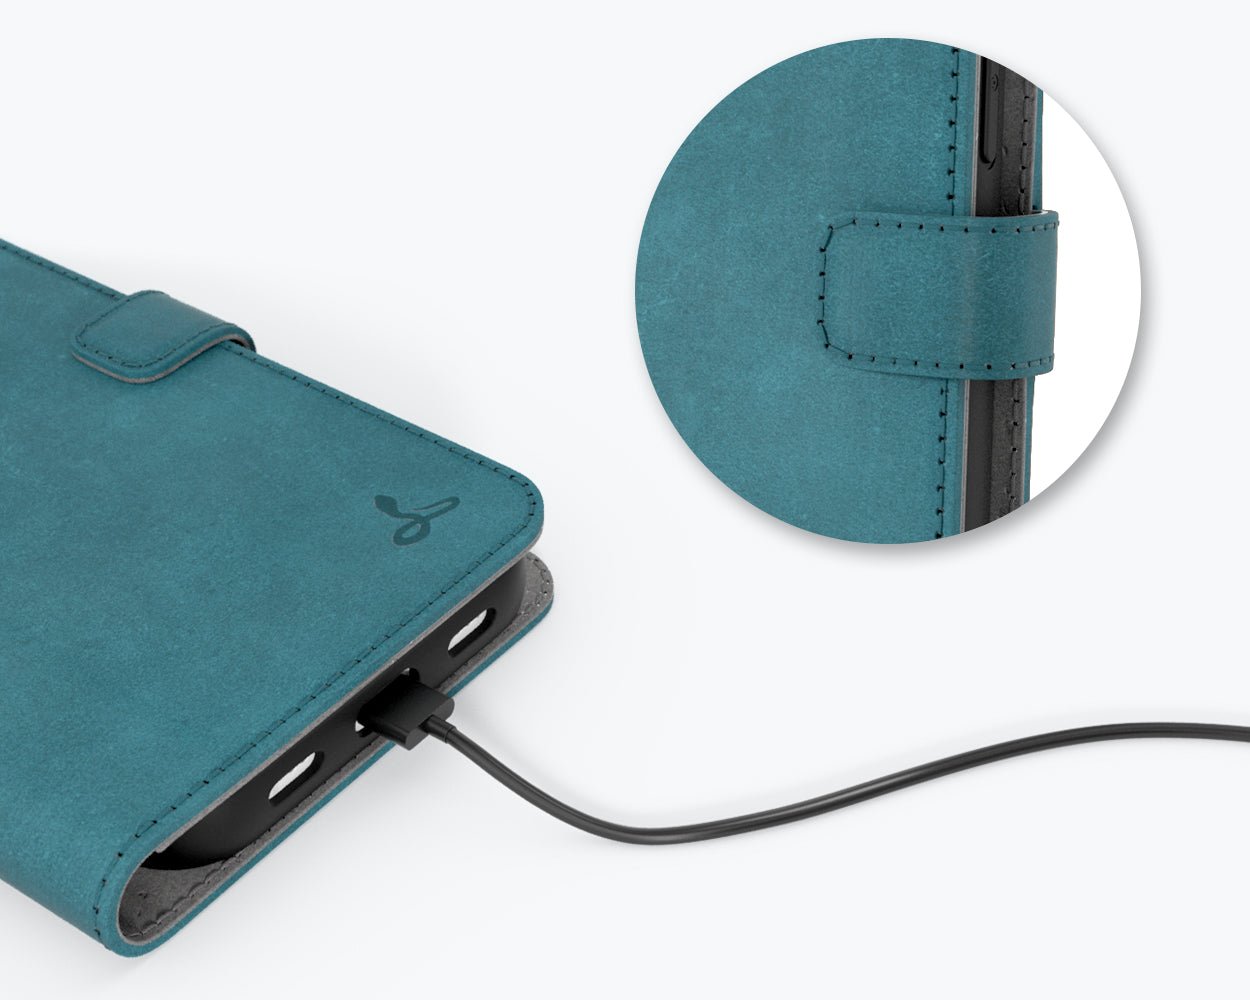 Apple iPhone 13 - Vintage Leather Wallet (Almost Perfect) Teal Apple iPhone 13 - Snakehive UK